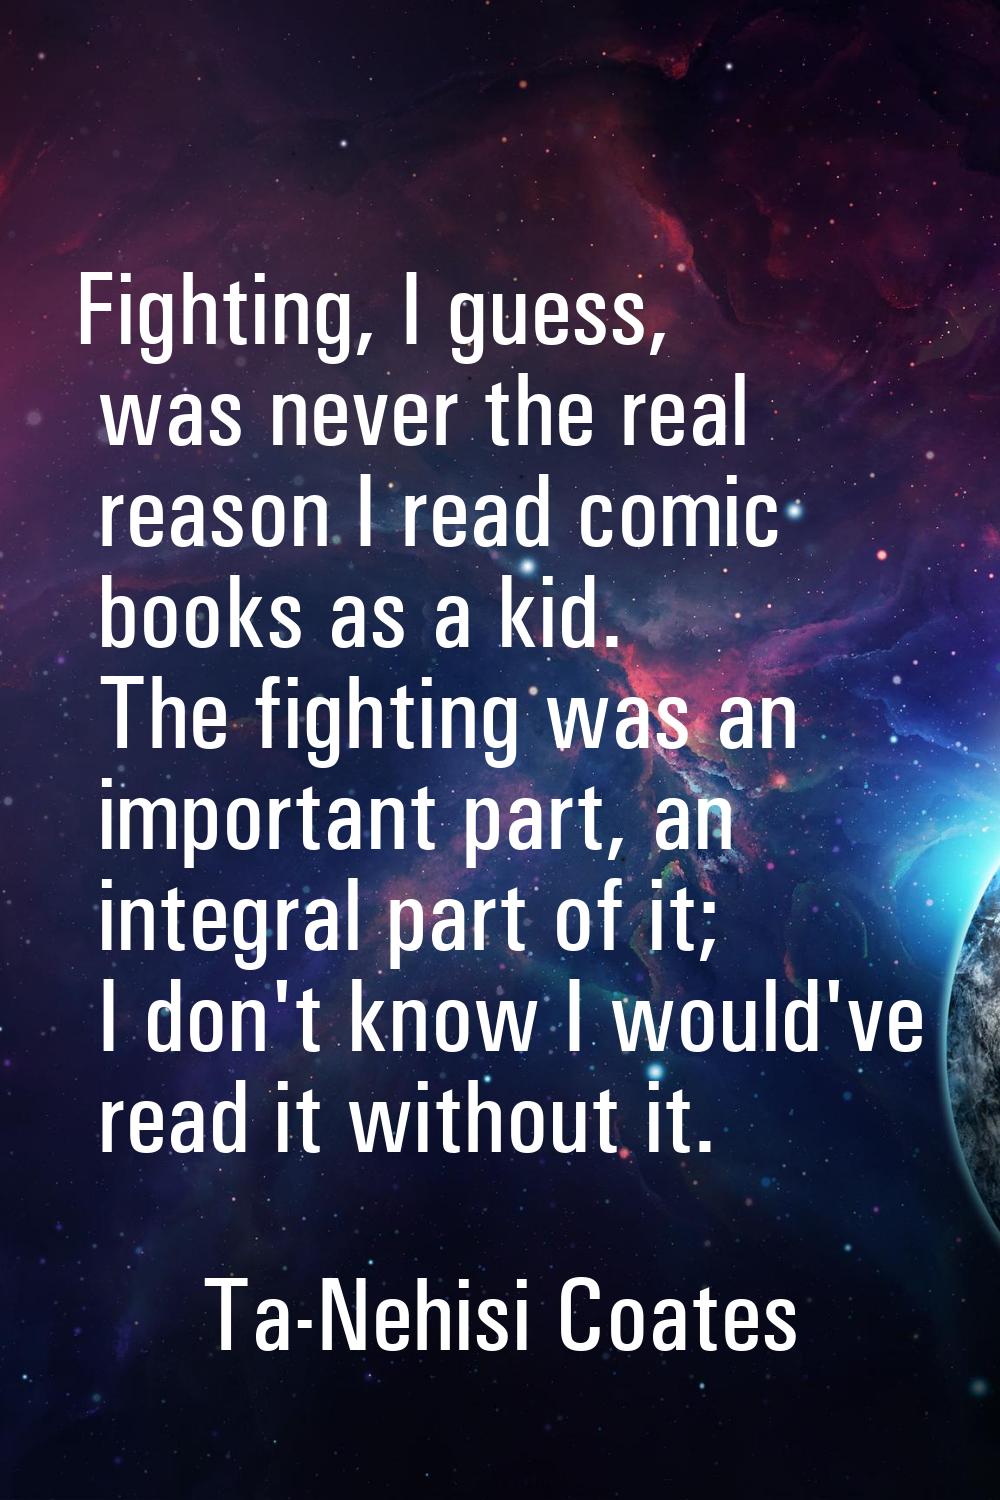 Fighting, I guess, was never the real reason I read comic books as a kid. The fighting was an impor